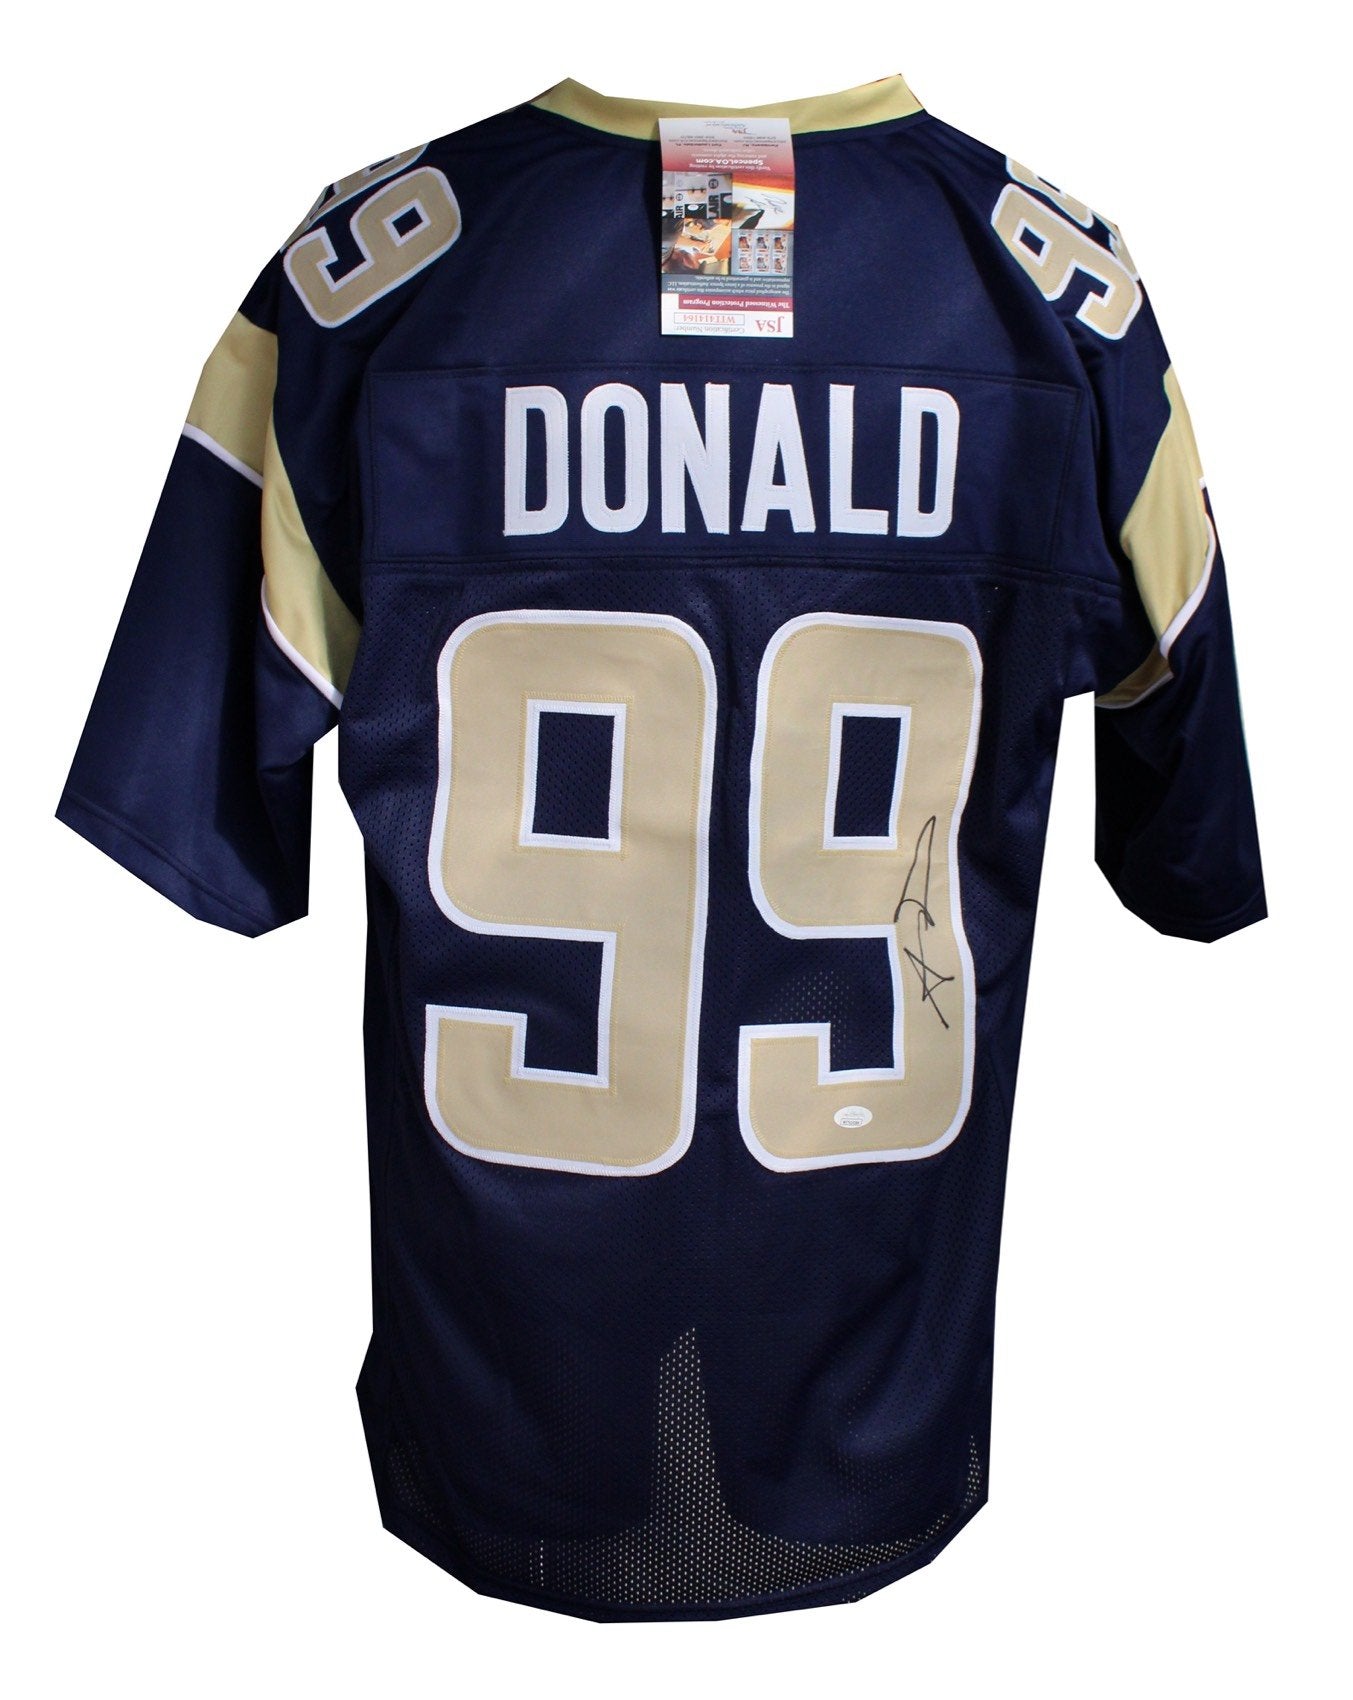 blue and gold rams jersey